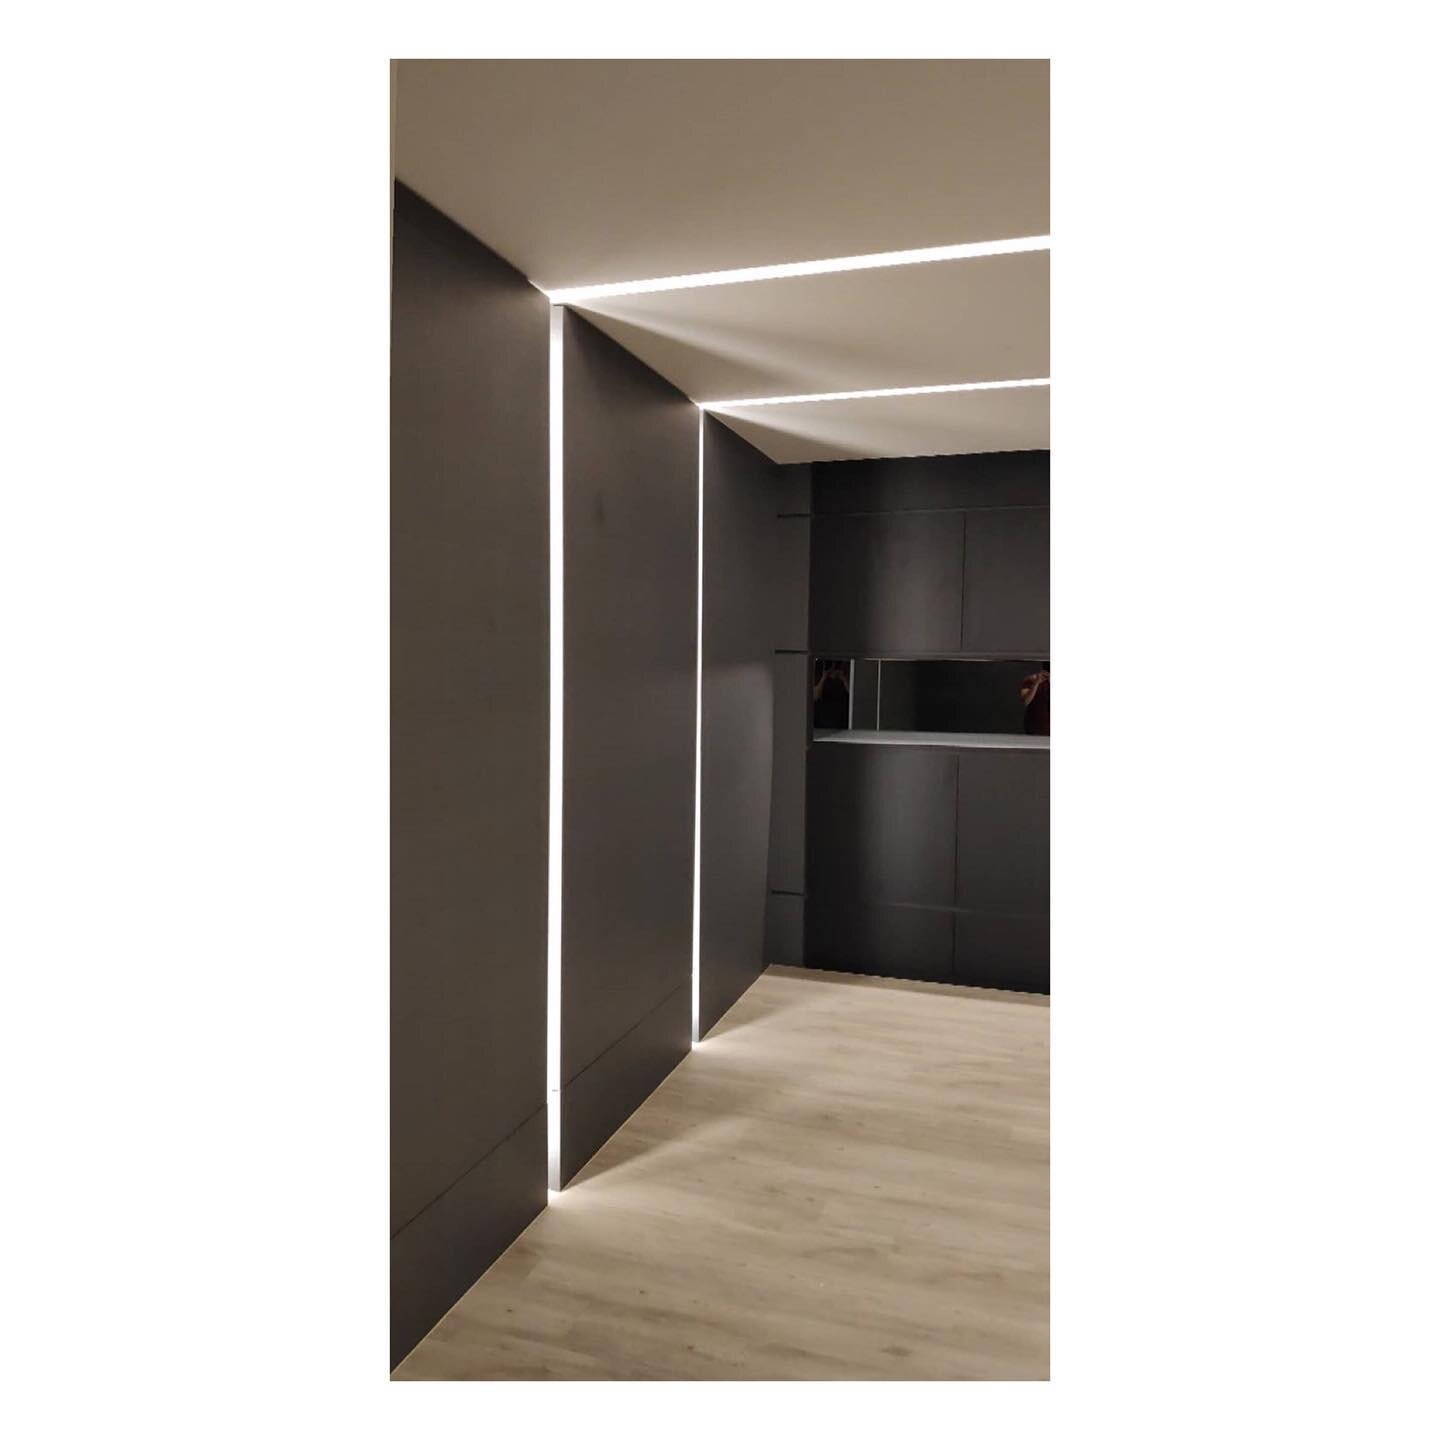 Interior - #Entertainment wall linear lights with a sense of technology by using self-constructed wall panel with hidden #ledlightstrip 💡🛋🎼📽

室内 - 通过使用带有隐藏式LED灯的自建墙面板，具有技术感的#娱乐定制墙灯 

#interiordesign&nbsp;#interiordesigning&nbsp;#singaporeinterior